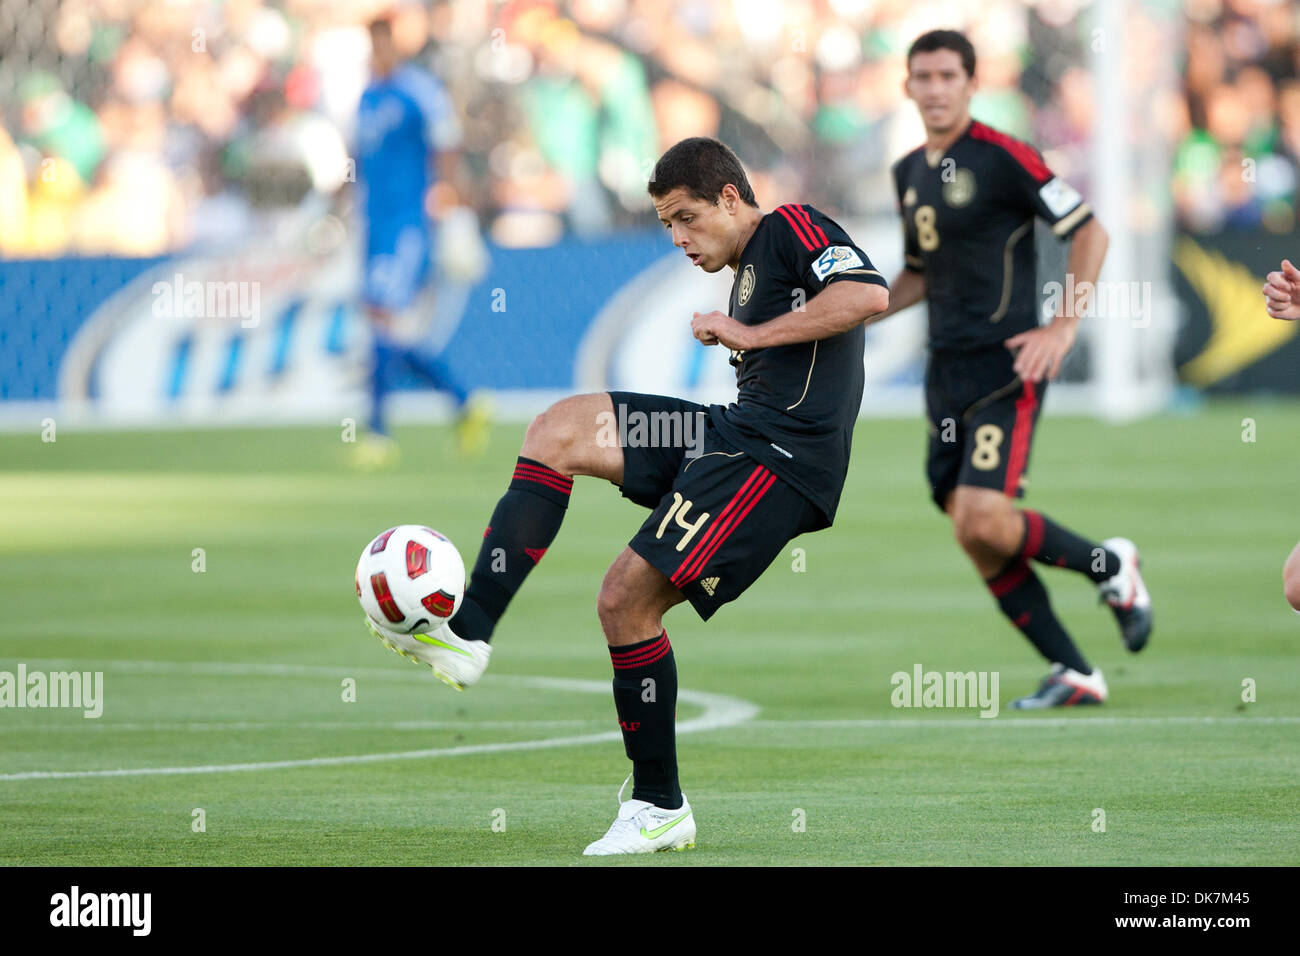 June 25, 2011 - Pasadena, California, U.S - Mexico forward Javier ''Chicharito'' Hernandez #14 in action during the 2011 CONCACAF Gold Cup championship game between United States and Mexico at a sold out Rose Bowl. Mexico went on to defeat United States with a final score of 4-2. (Credit Image: © Brandon Parry/Southcreek Global/ZUMAPRESS.com) Stock Photo